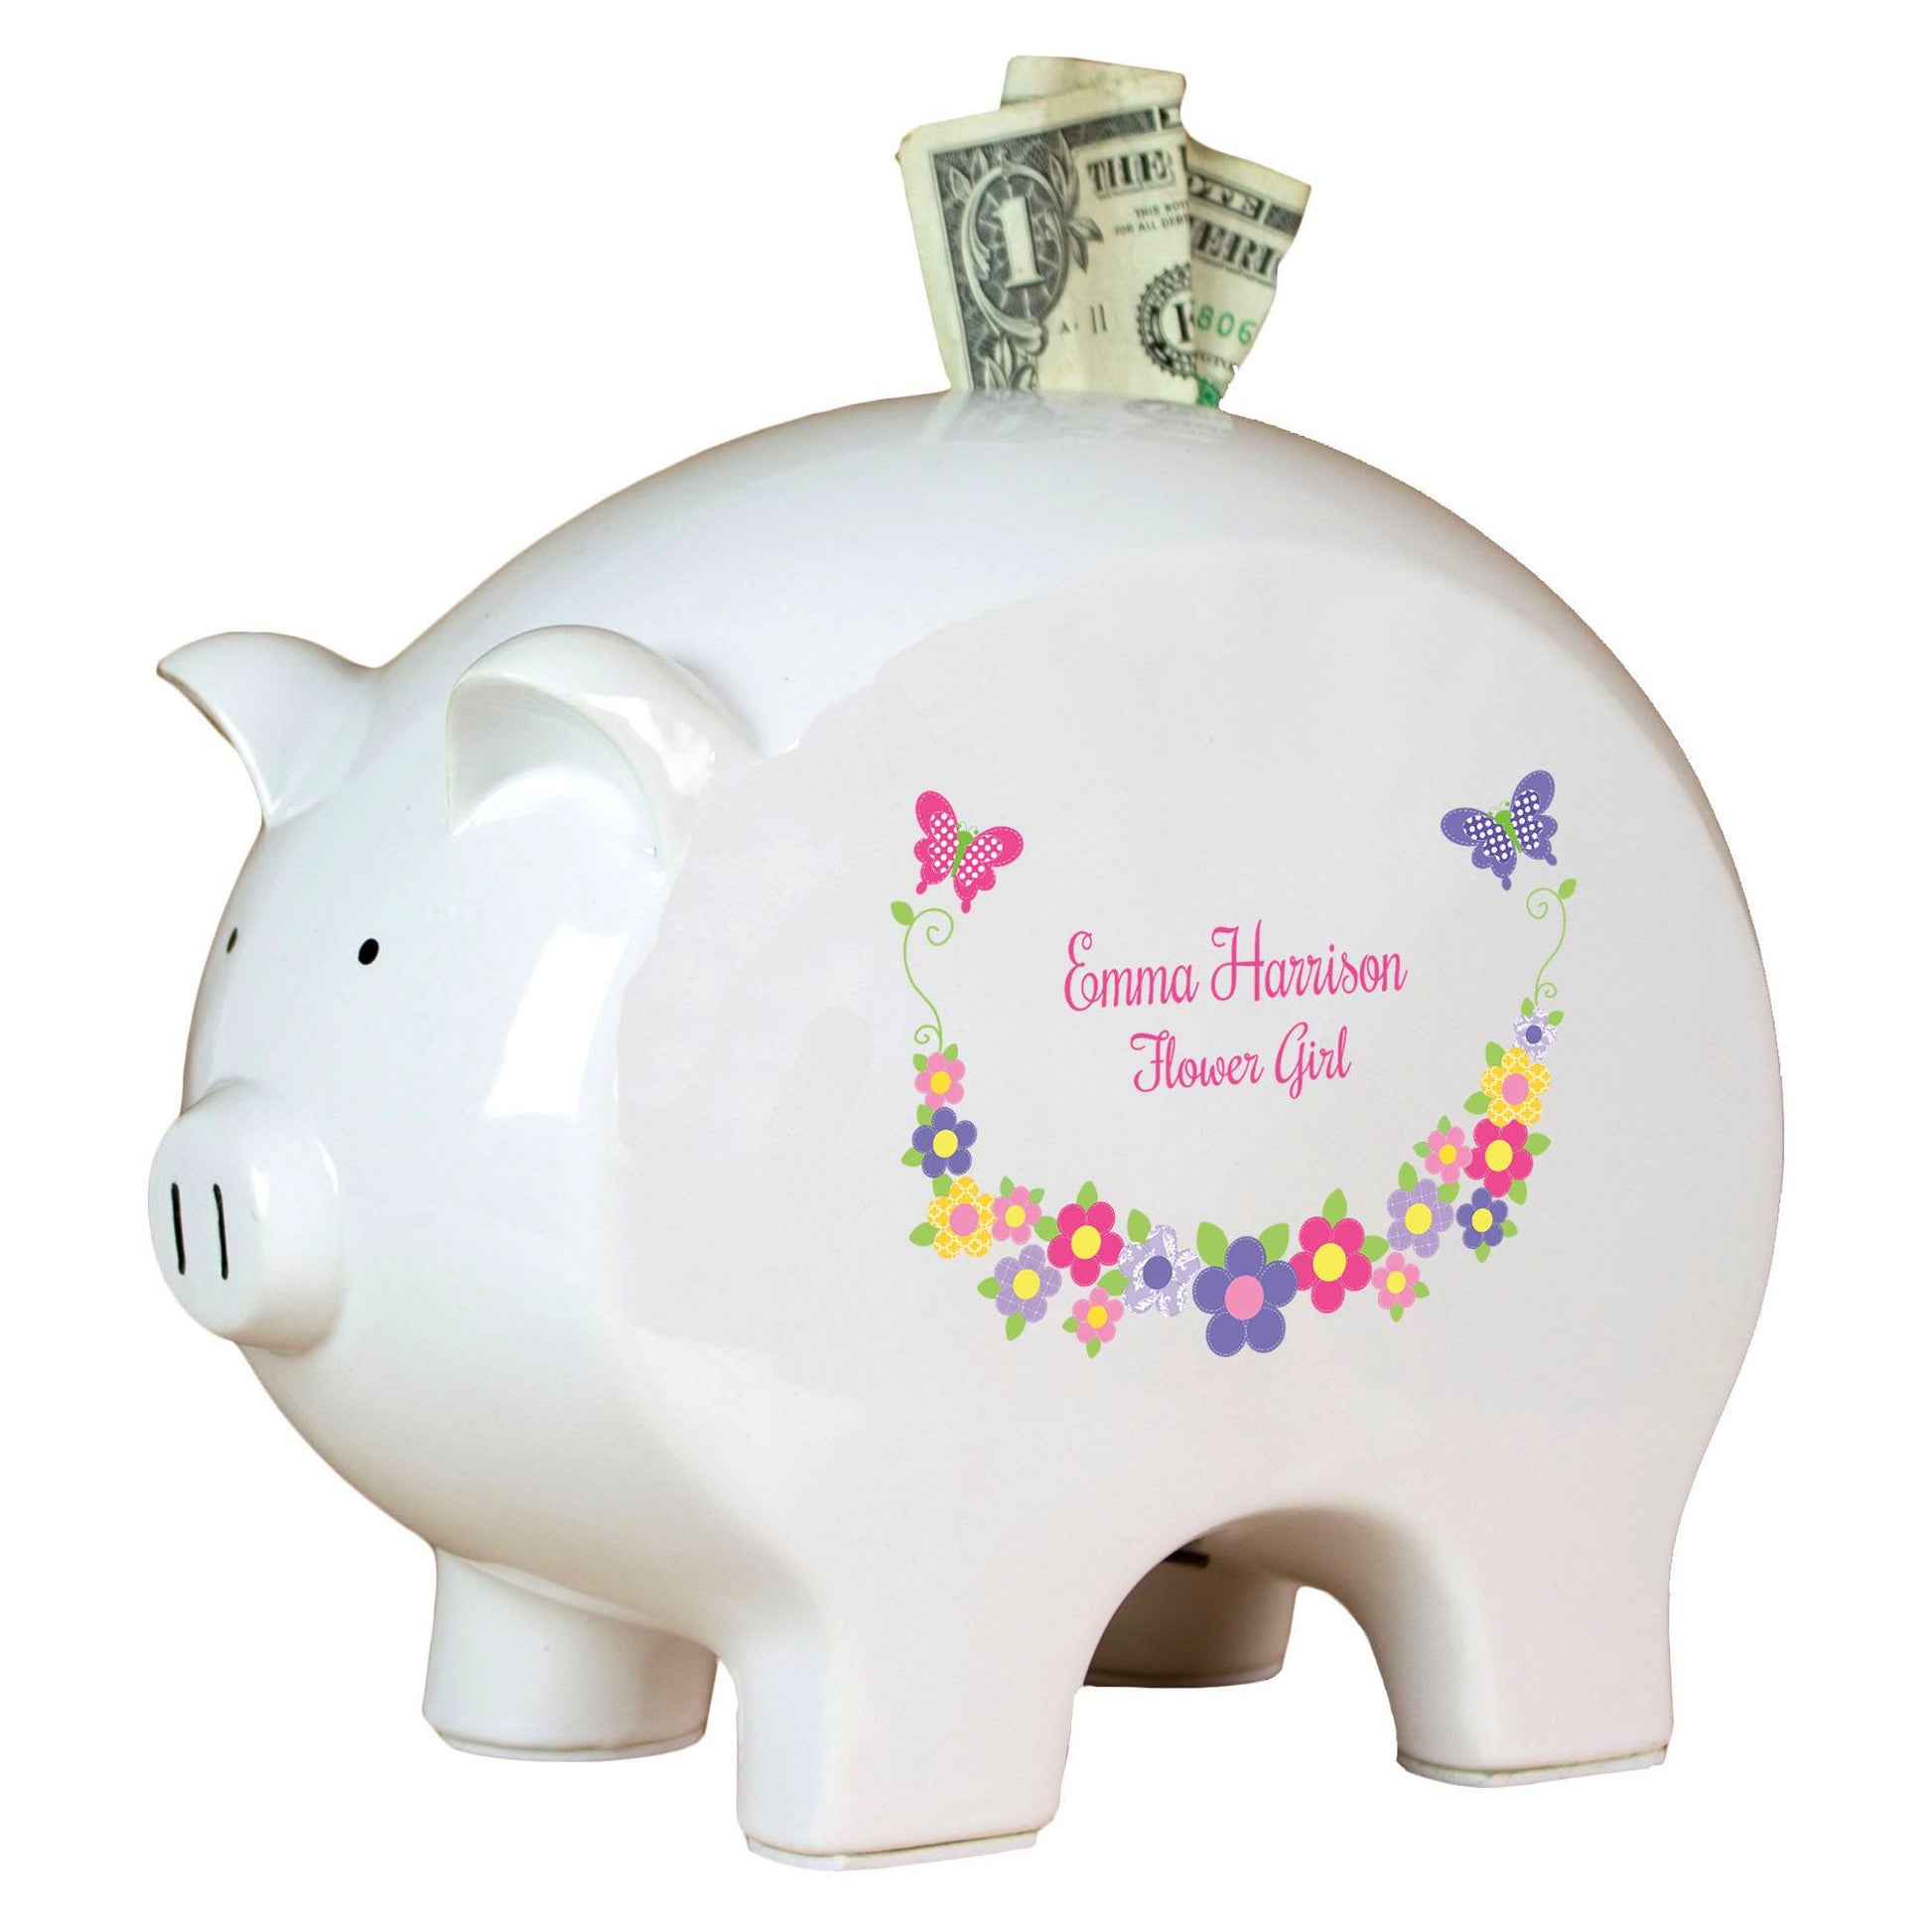 Personalized Piggy Bank with Bright Butterflies Garland design